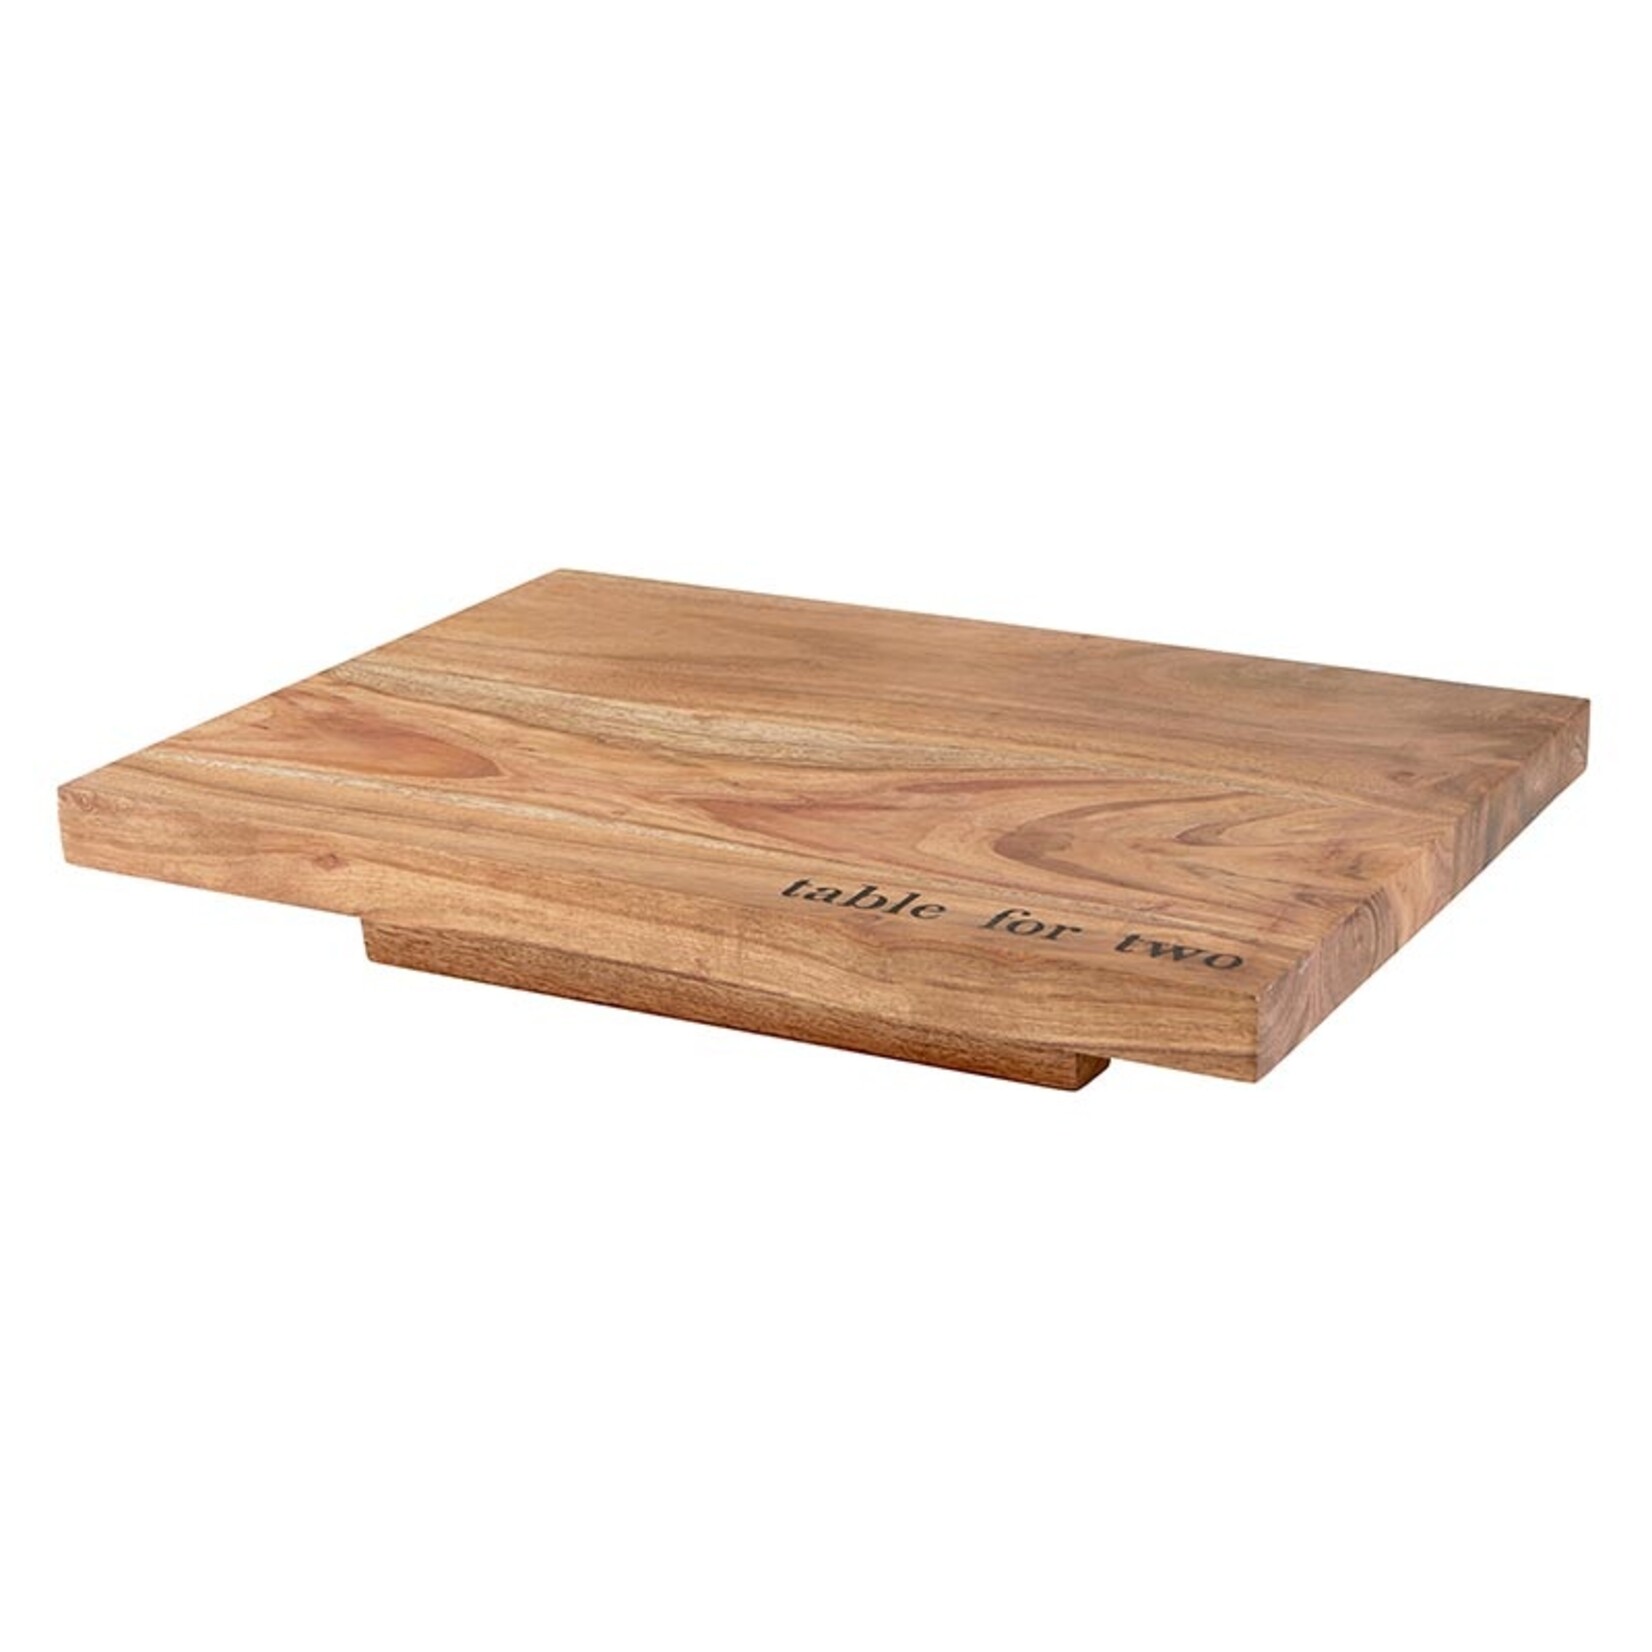 Creative Brands Table For Two Wooden Board - 15.5"x11.6"